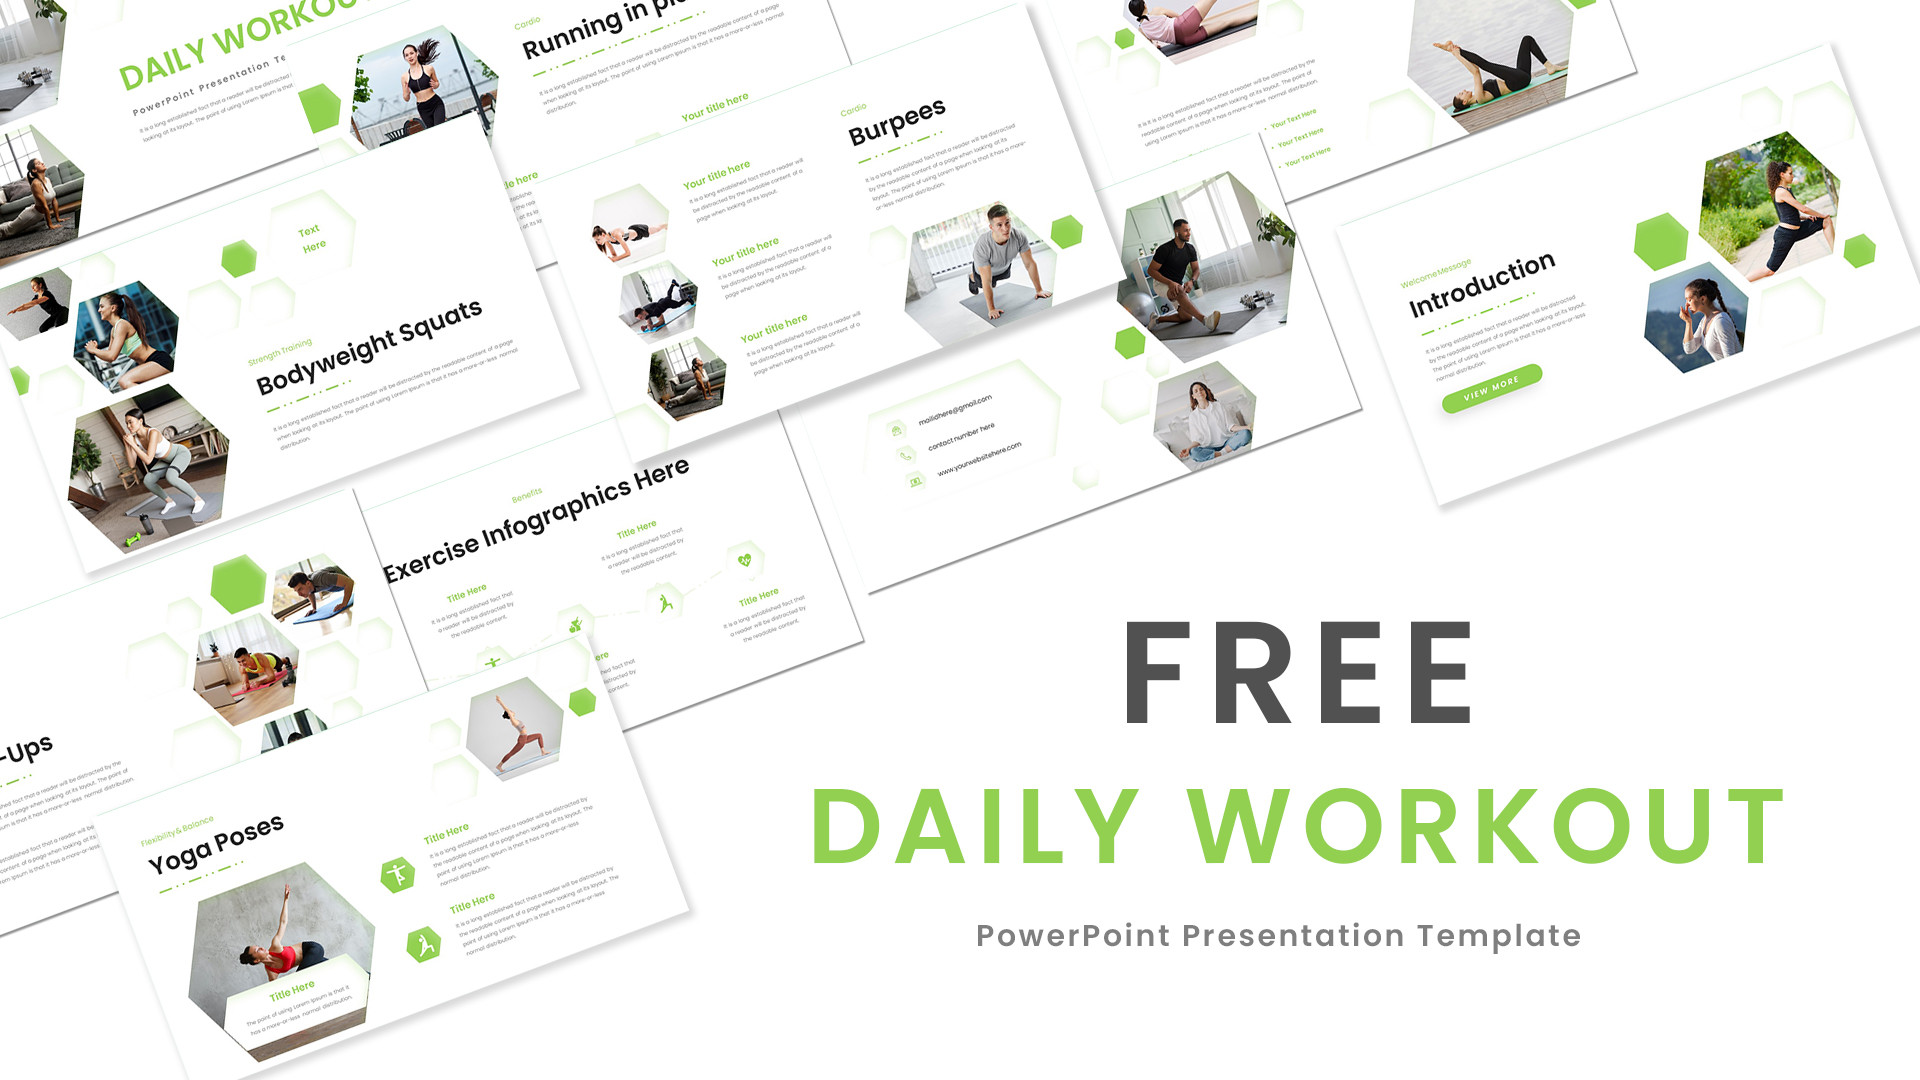 Download PowerPoint Templates for Presentations